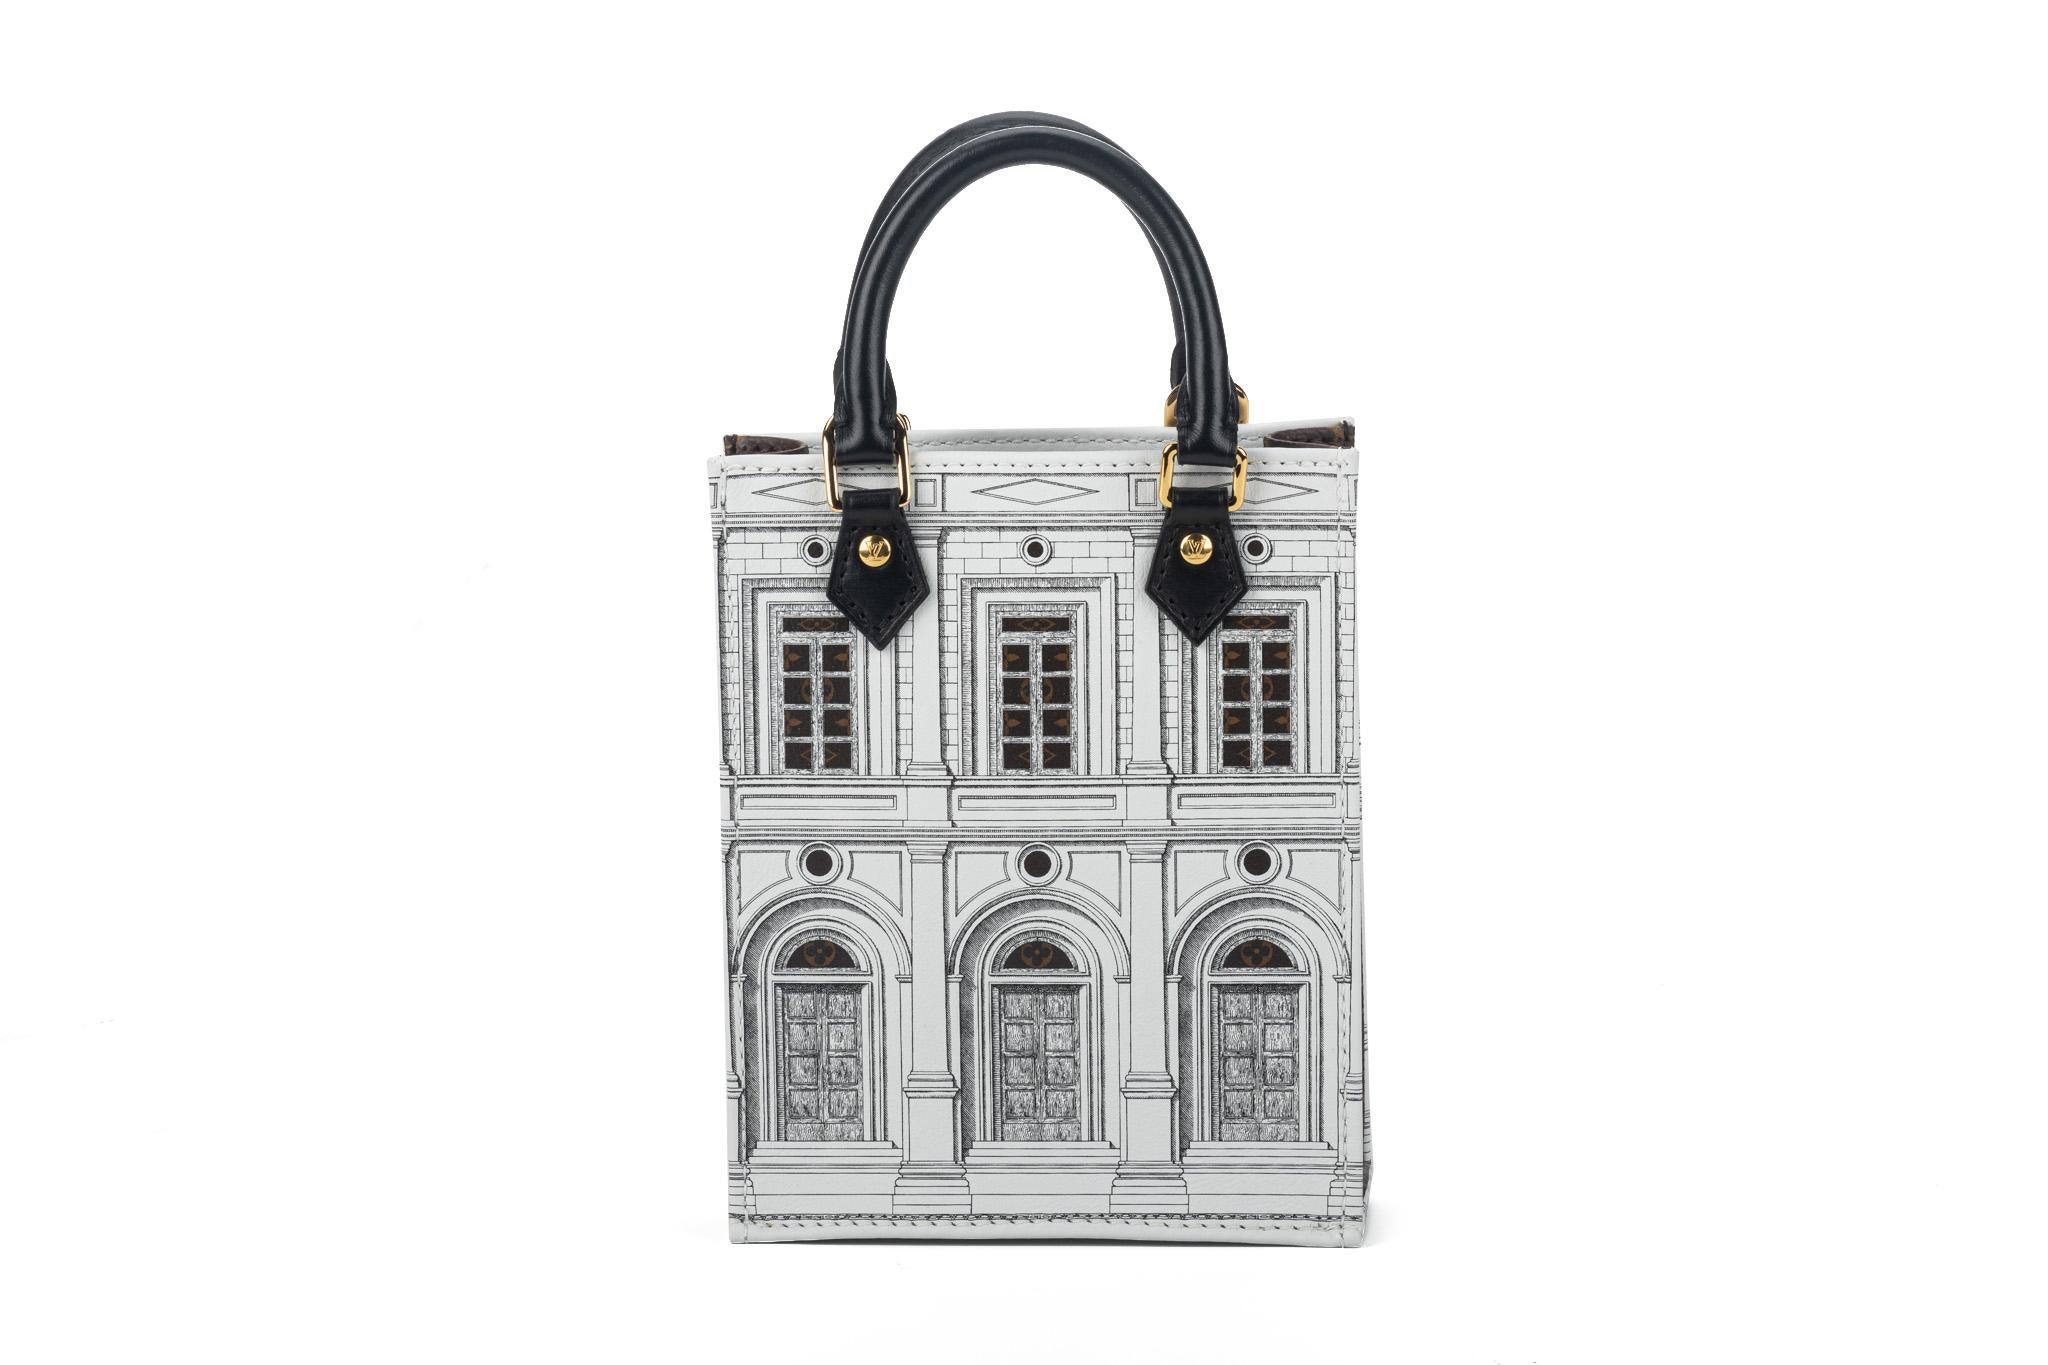 New Louis Vuitton Limited Edition Fornasetti Sac Plat Bag In New Condition For Sale In West Hollywood, CA